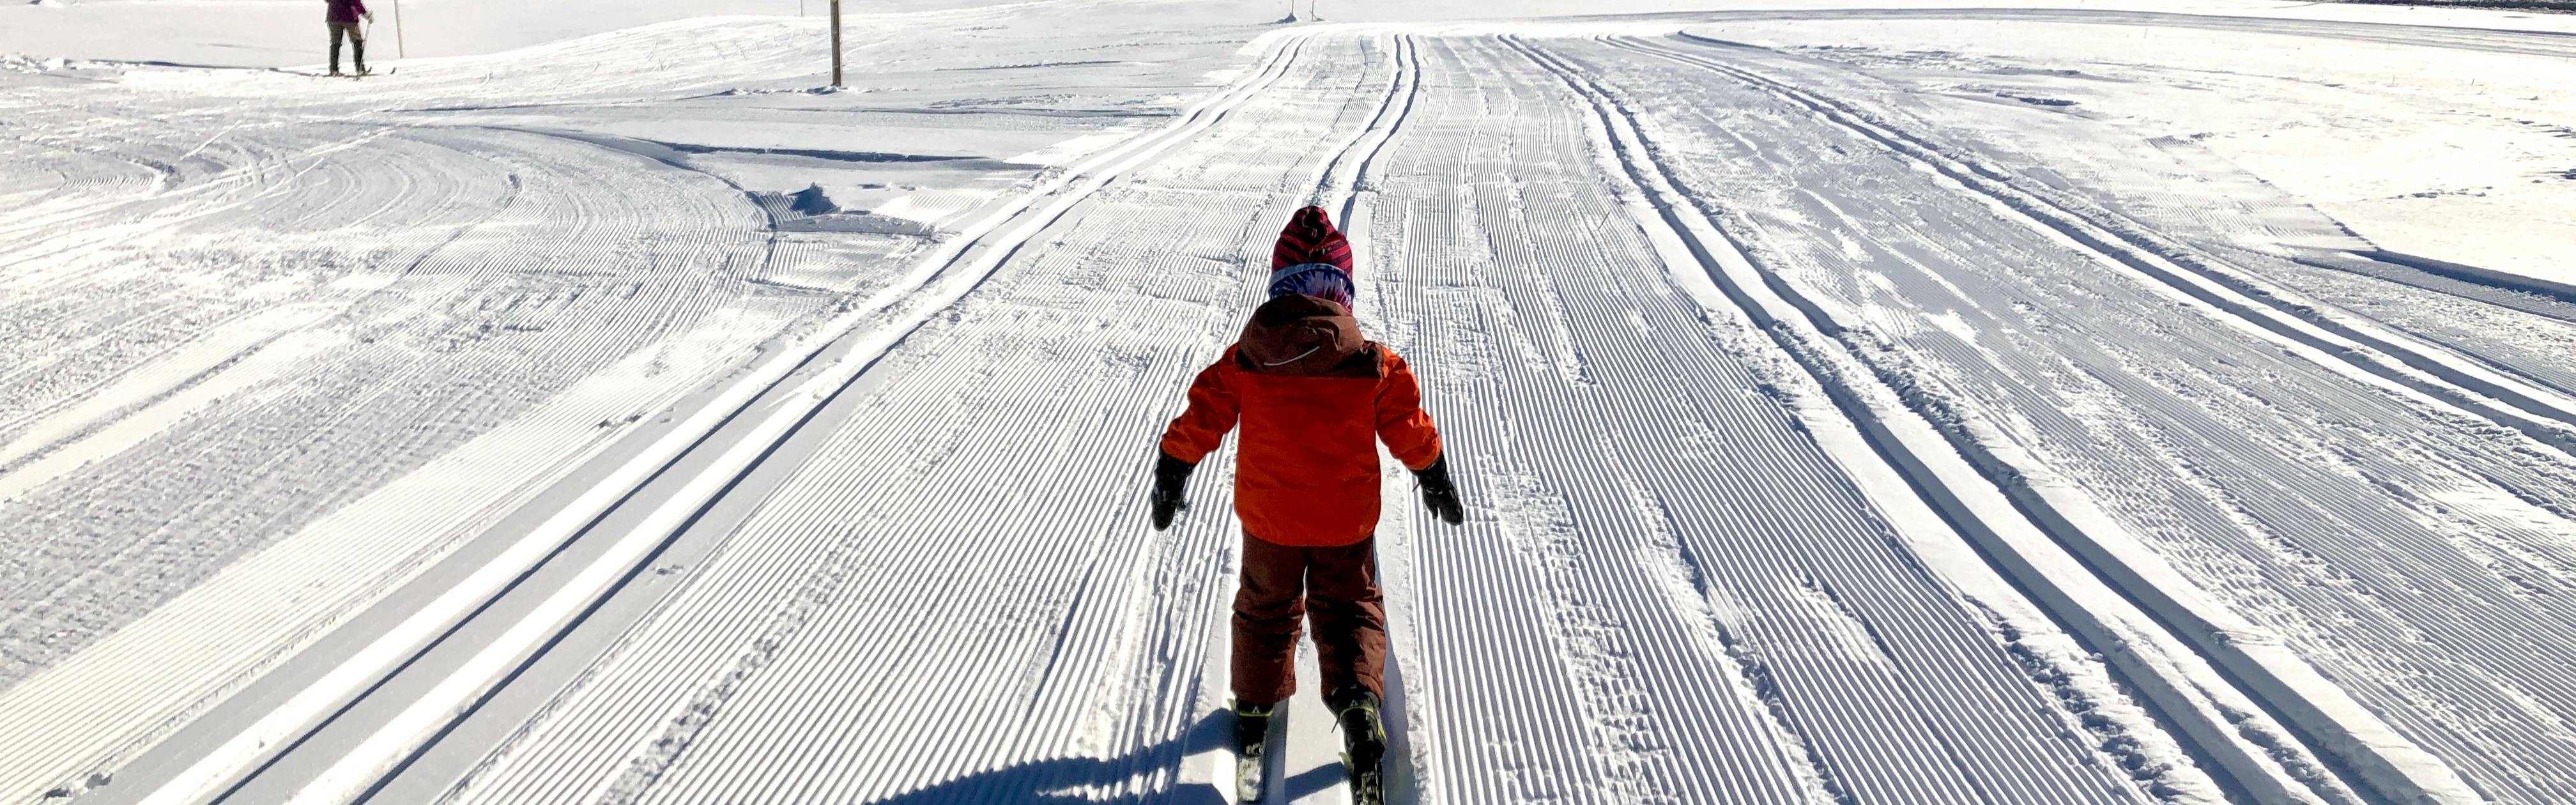 Young child cross country skis along a groomed track. He is wearing a red jacket.